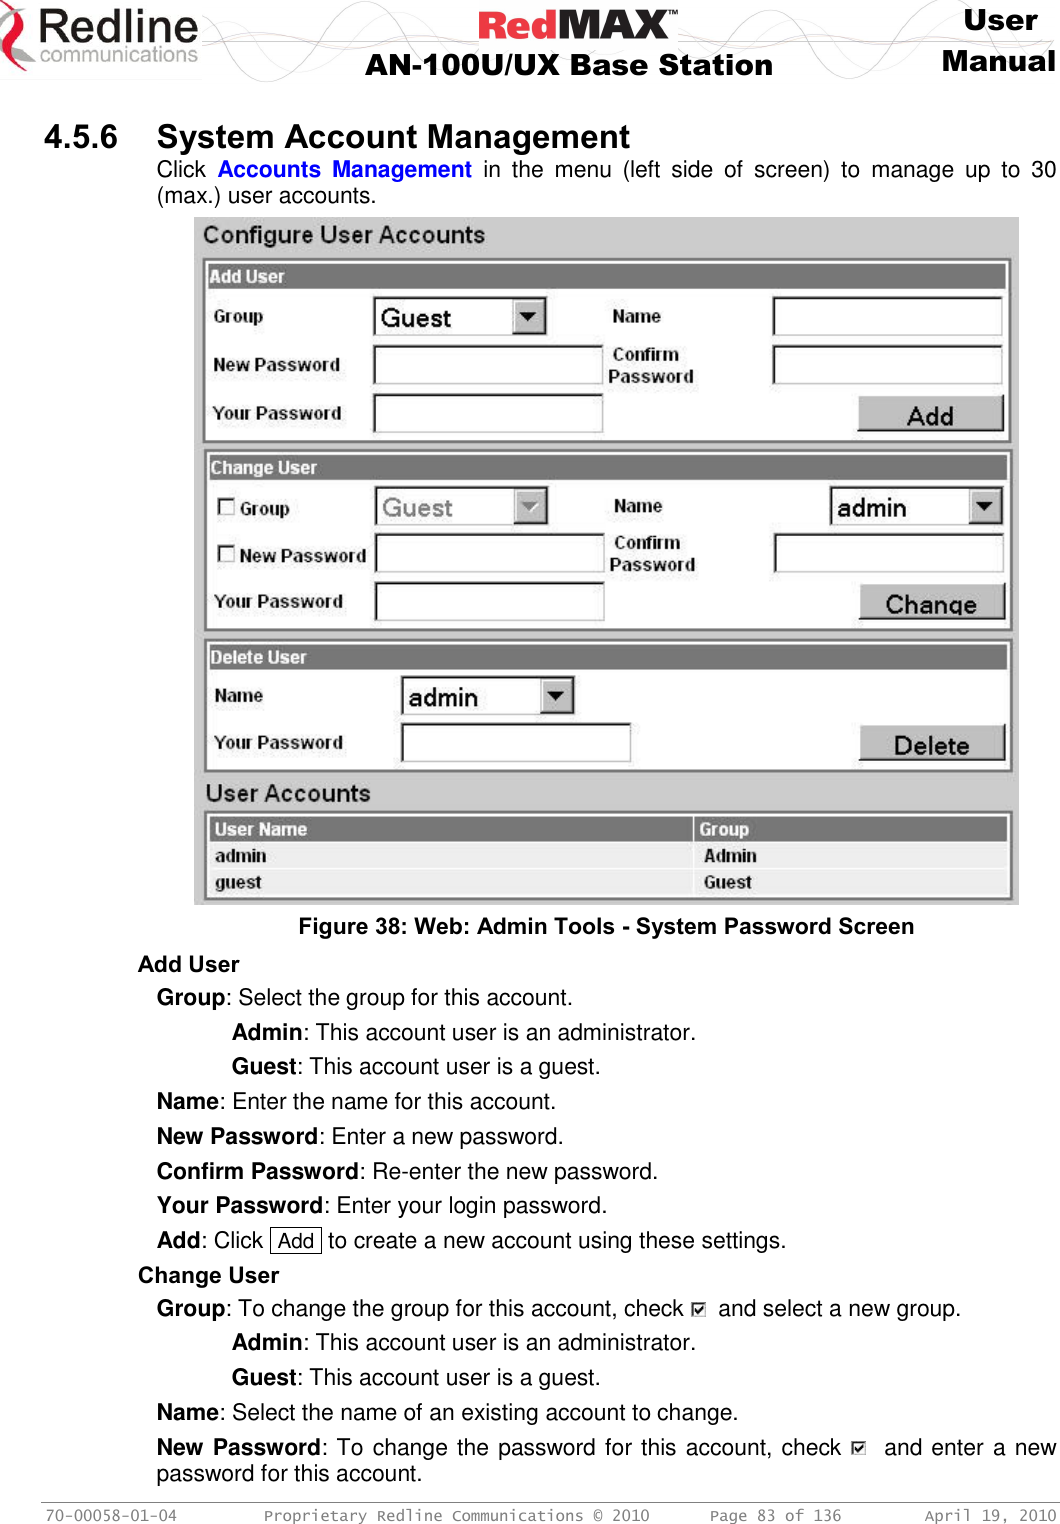     User  AN-100U/UX Base Station Manual   70-00058-01-04  Proprietary Redline Communications © 2010   Page 83 of 136  April 19, 2010  4.5.6 System Account Management Click  Accounts  Management  in  the  menu  (left  side  of  screen)  to  manage  up  to  30 (max.) user accounts.   Figure 38: Web: Admin Tools - System Password Screen Add User Group: Select the group for this account.   Admin: This account user is an administrator.   Guest: This account user is a guest. Name: Enter the name for this account. New Password: Enter a new password. Confirm Password: Re-enter the new password. Your Password: Enter your login password. Add: Click  Add  to create a new account using these settings. Change User Group: To change the group for this account, check    and select a new group.   Admin: This account user is an administrator.   Guest: This account user is a guest. Name: Select the name of an existing account to change. New Password: To change the password for this account, check    and enter a new password for this account. 